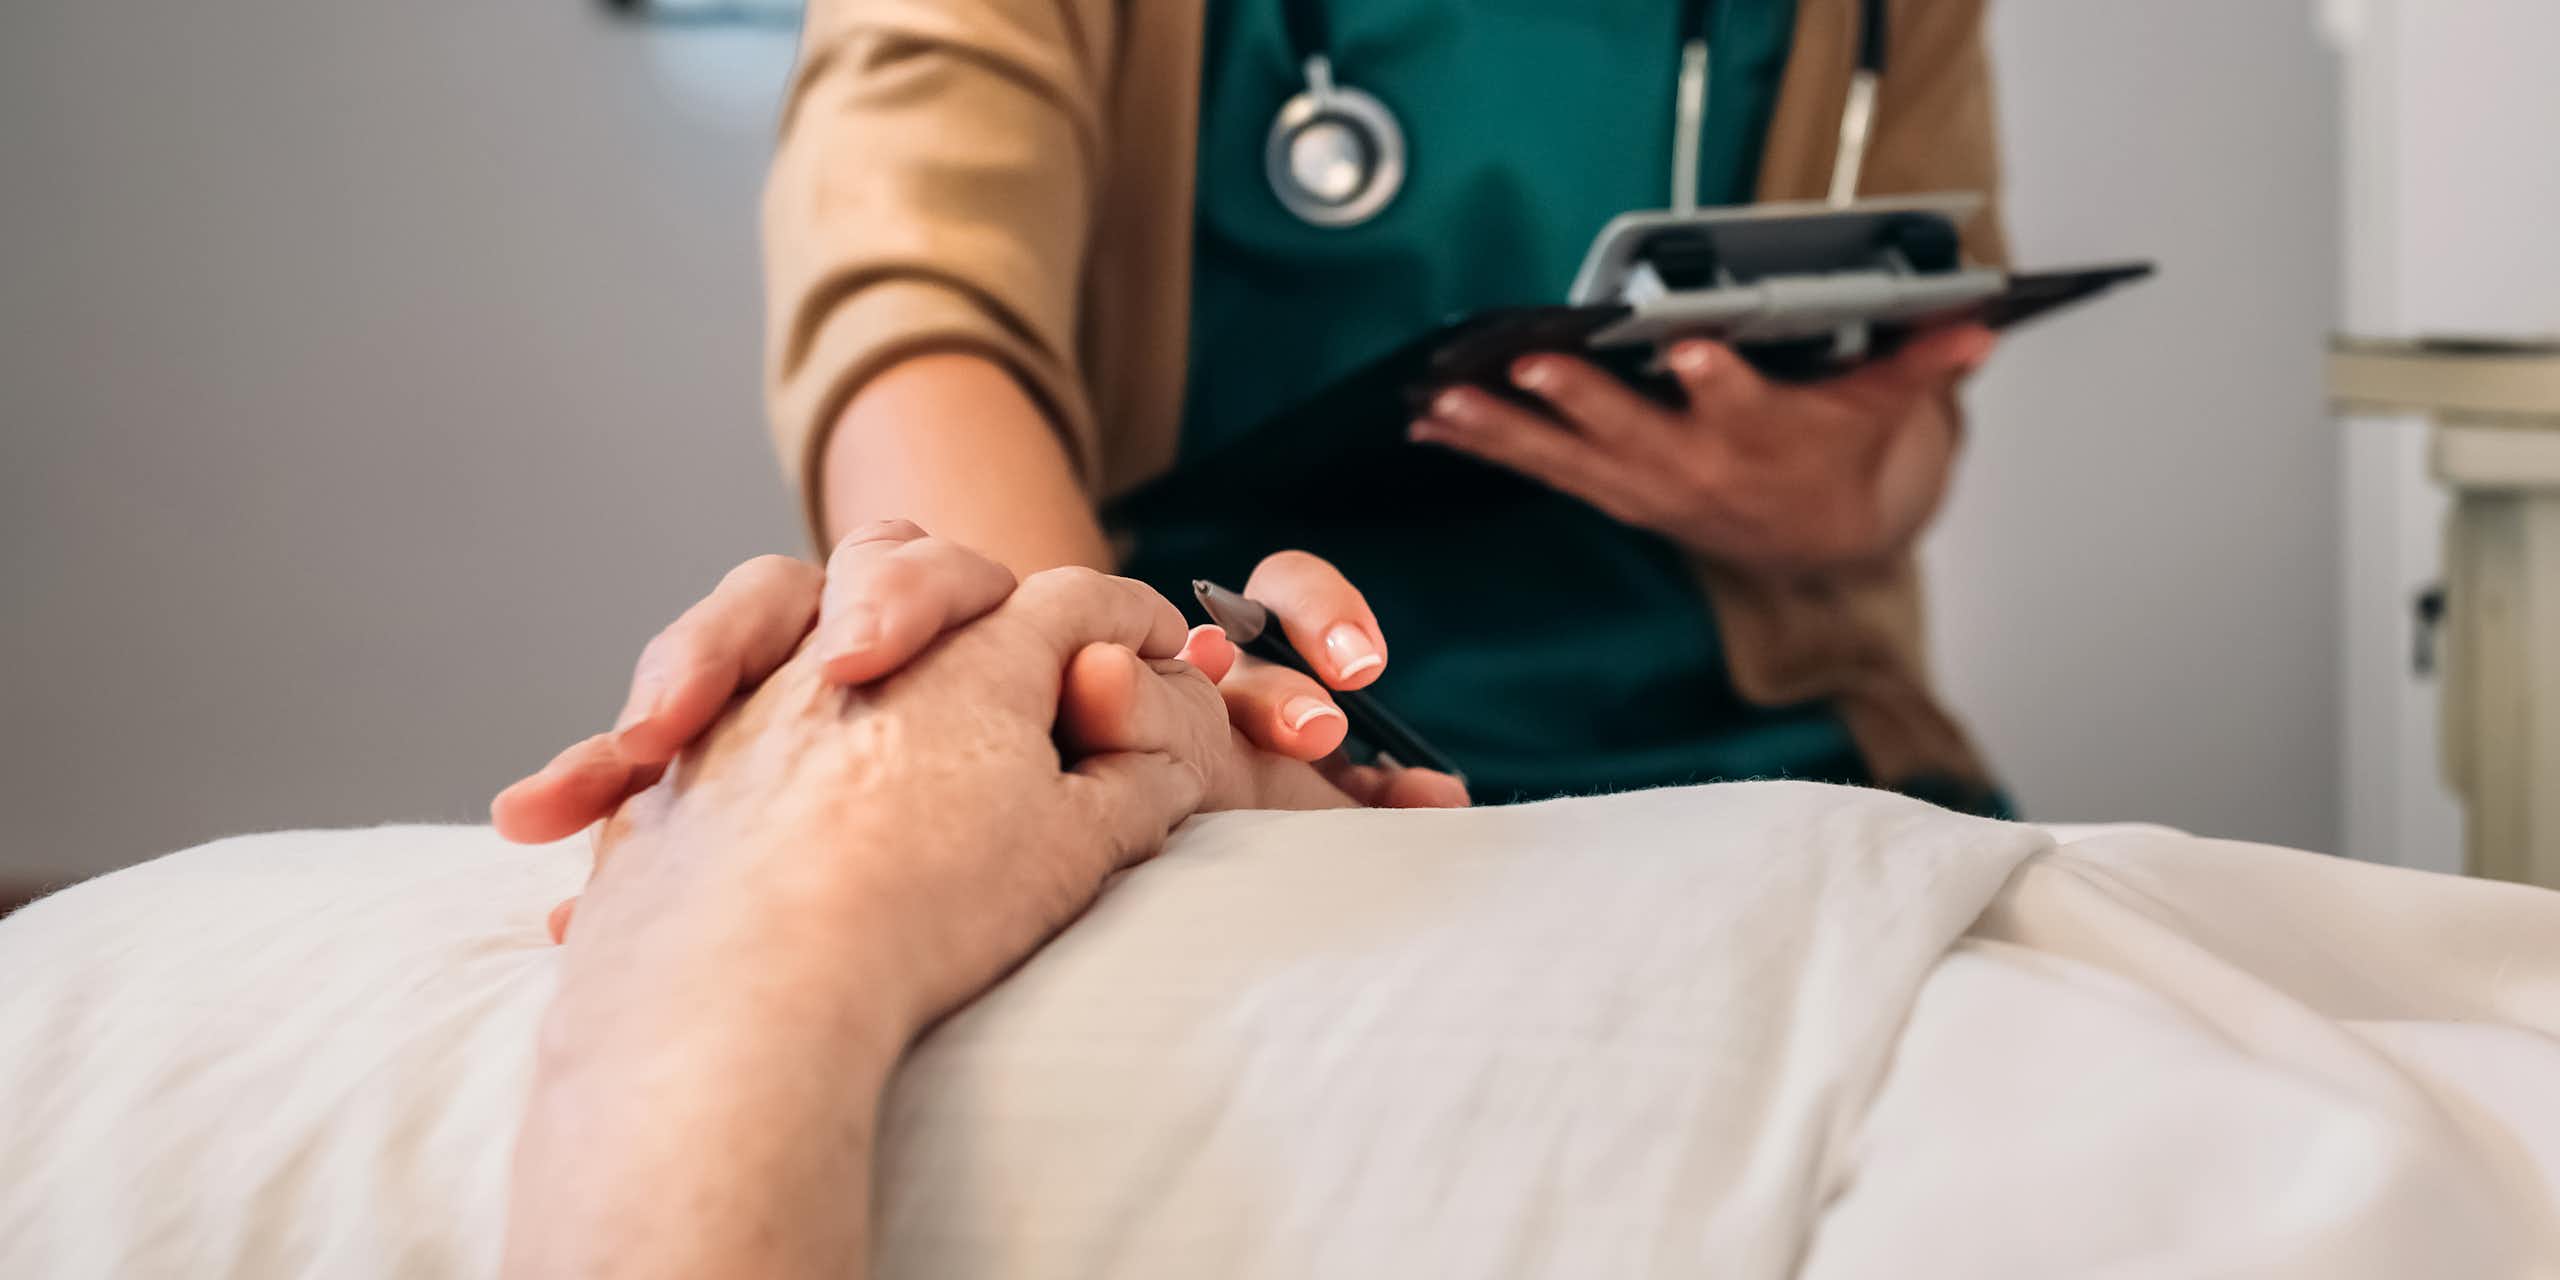 A doctor with a clipboard holds the hand of a patient on a bed.